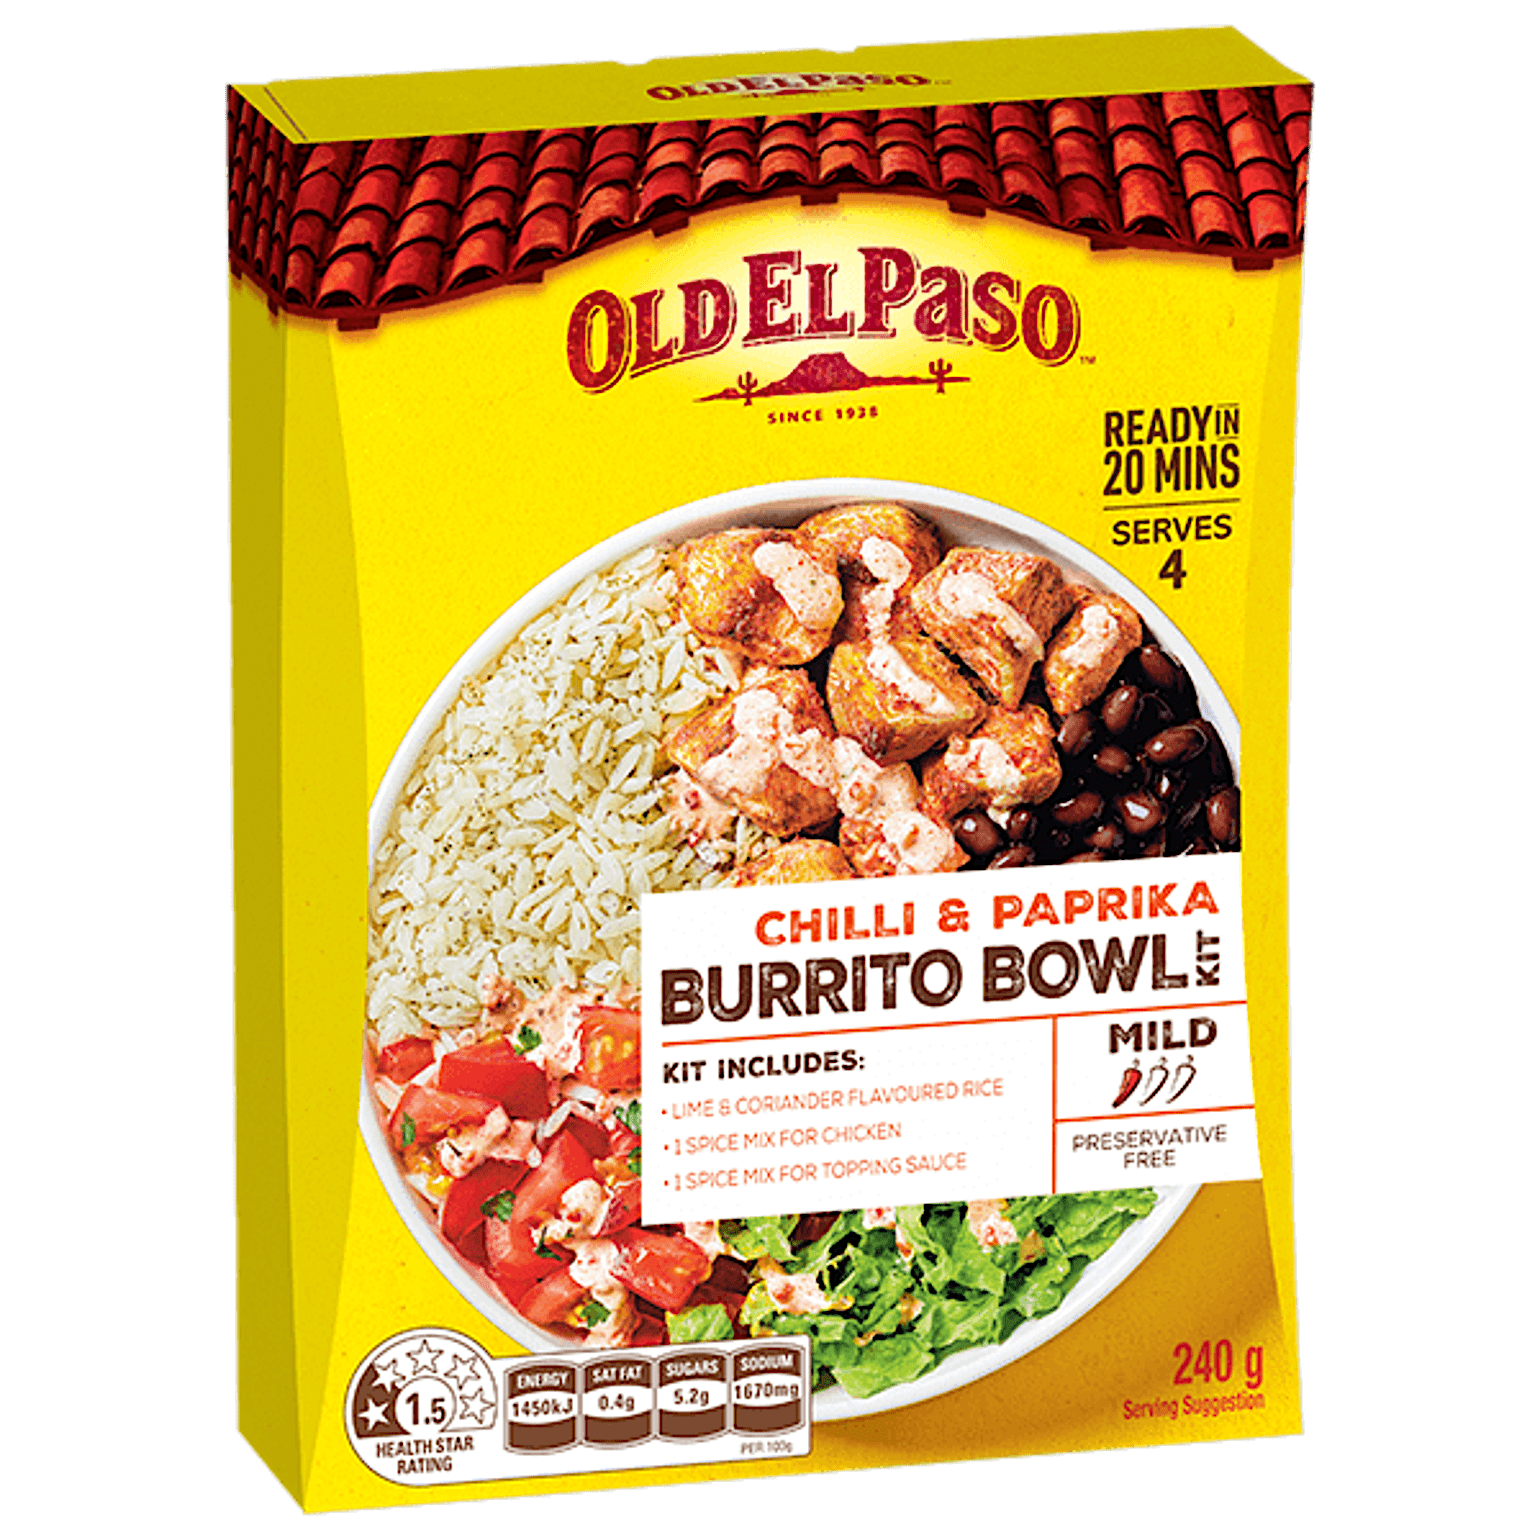 a pack of chili & paprika mild burrito bowl kit containing lime & coriander flavoured rice & spice mixes (240g)